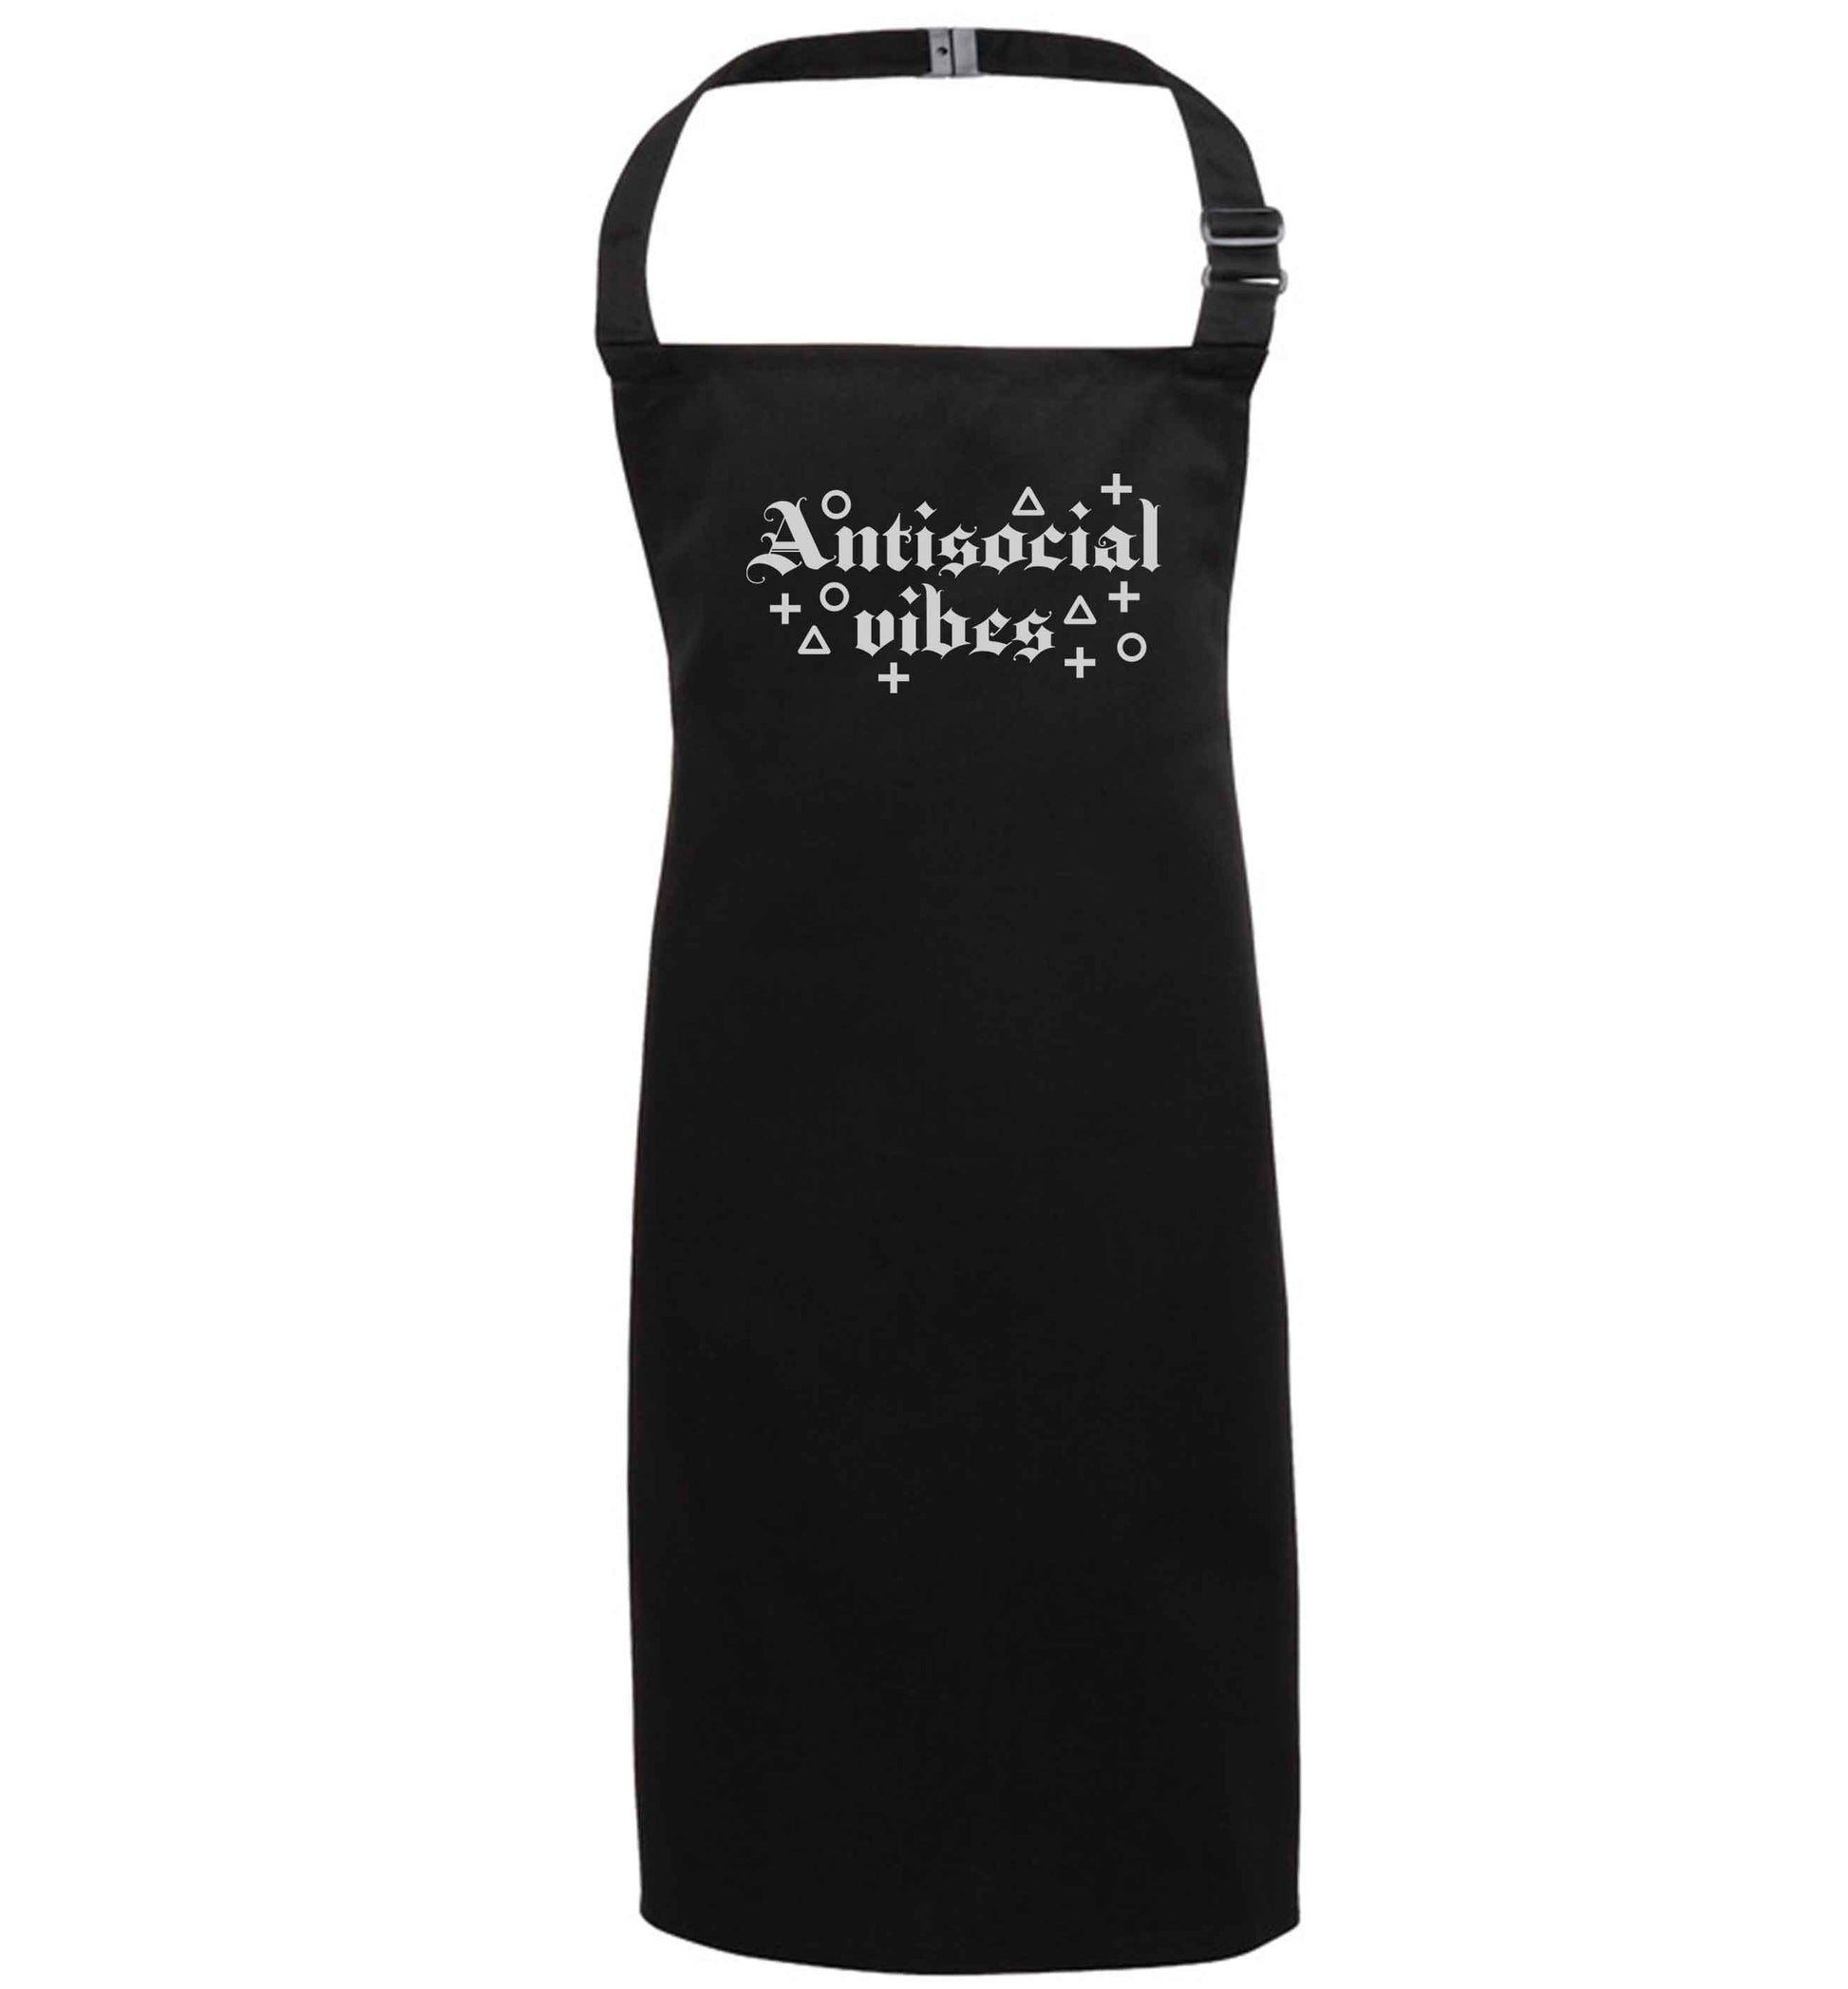 Antisocial vibes black apron 7-10 years